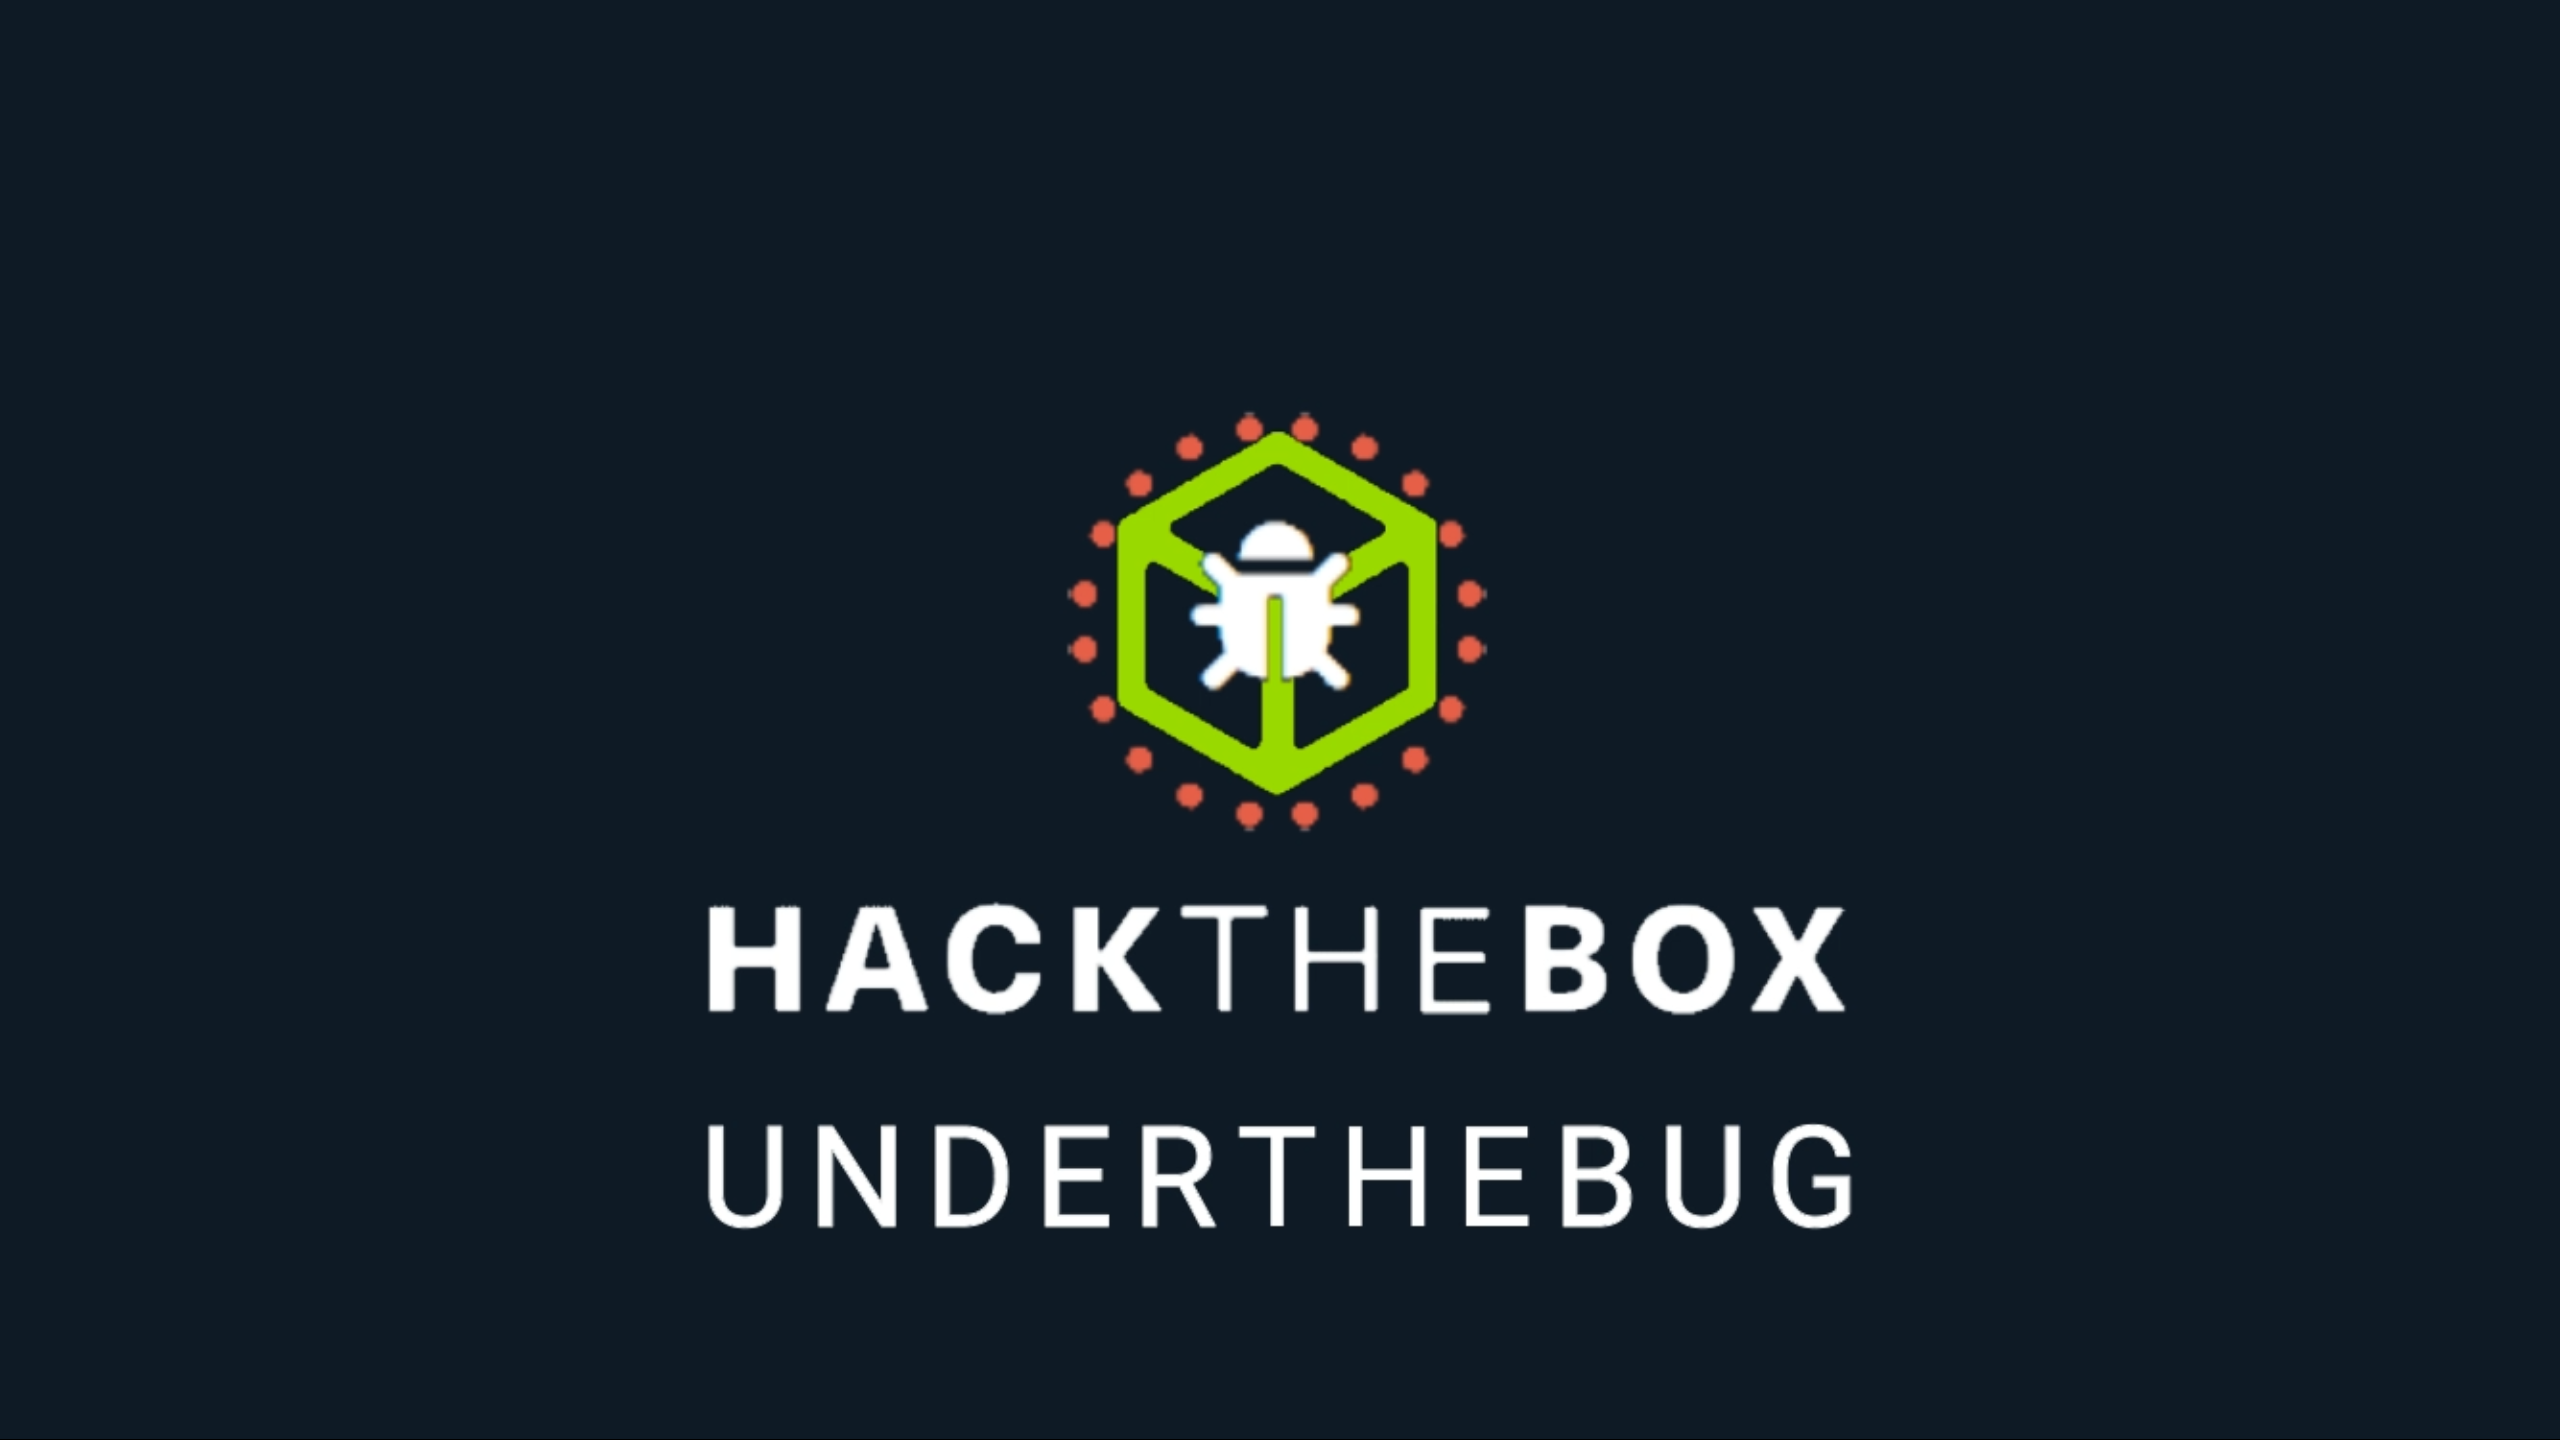 Bug Hunter - HackTheBox - Invite Code issues